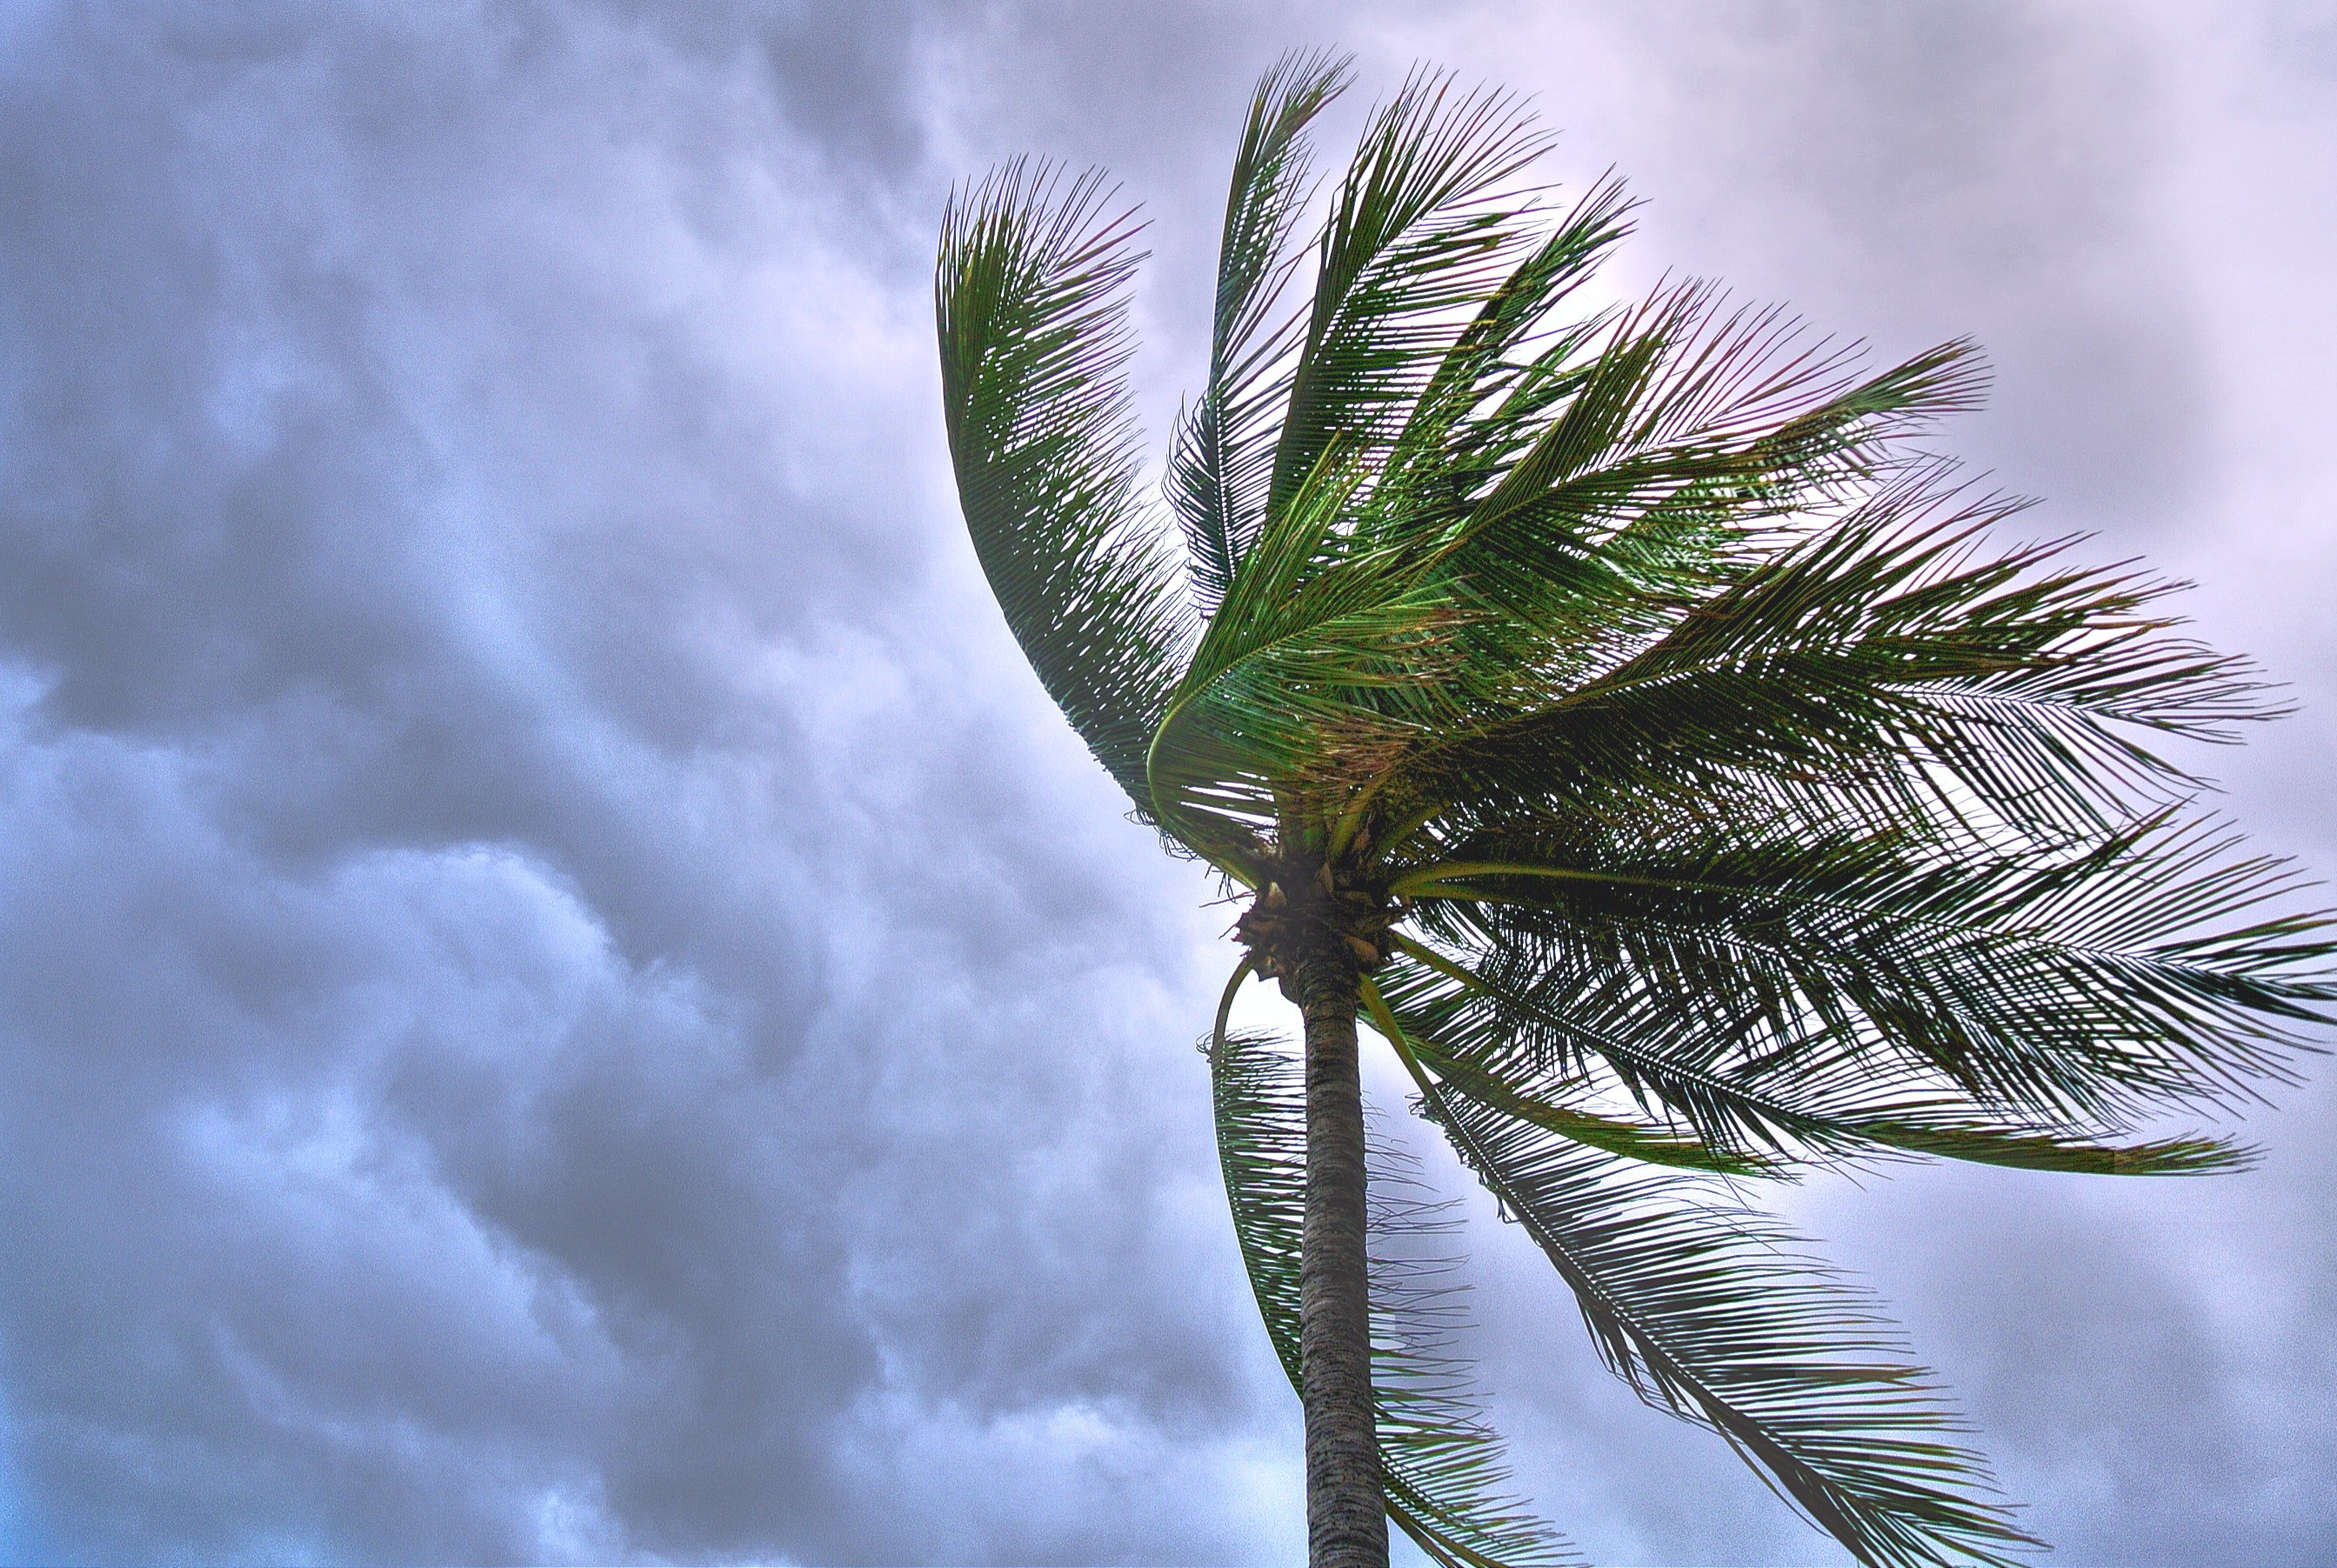 Pictured - An image of a coconut tree blown by the wind | Source: Pexels 